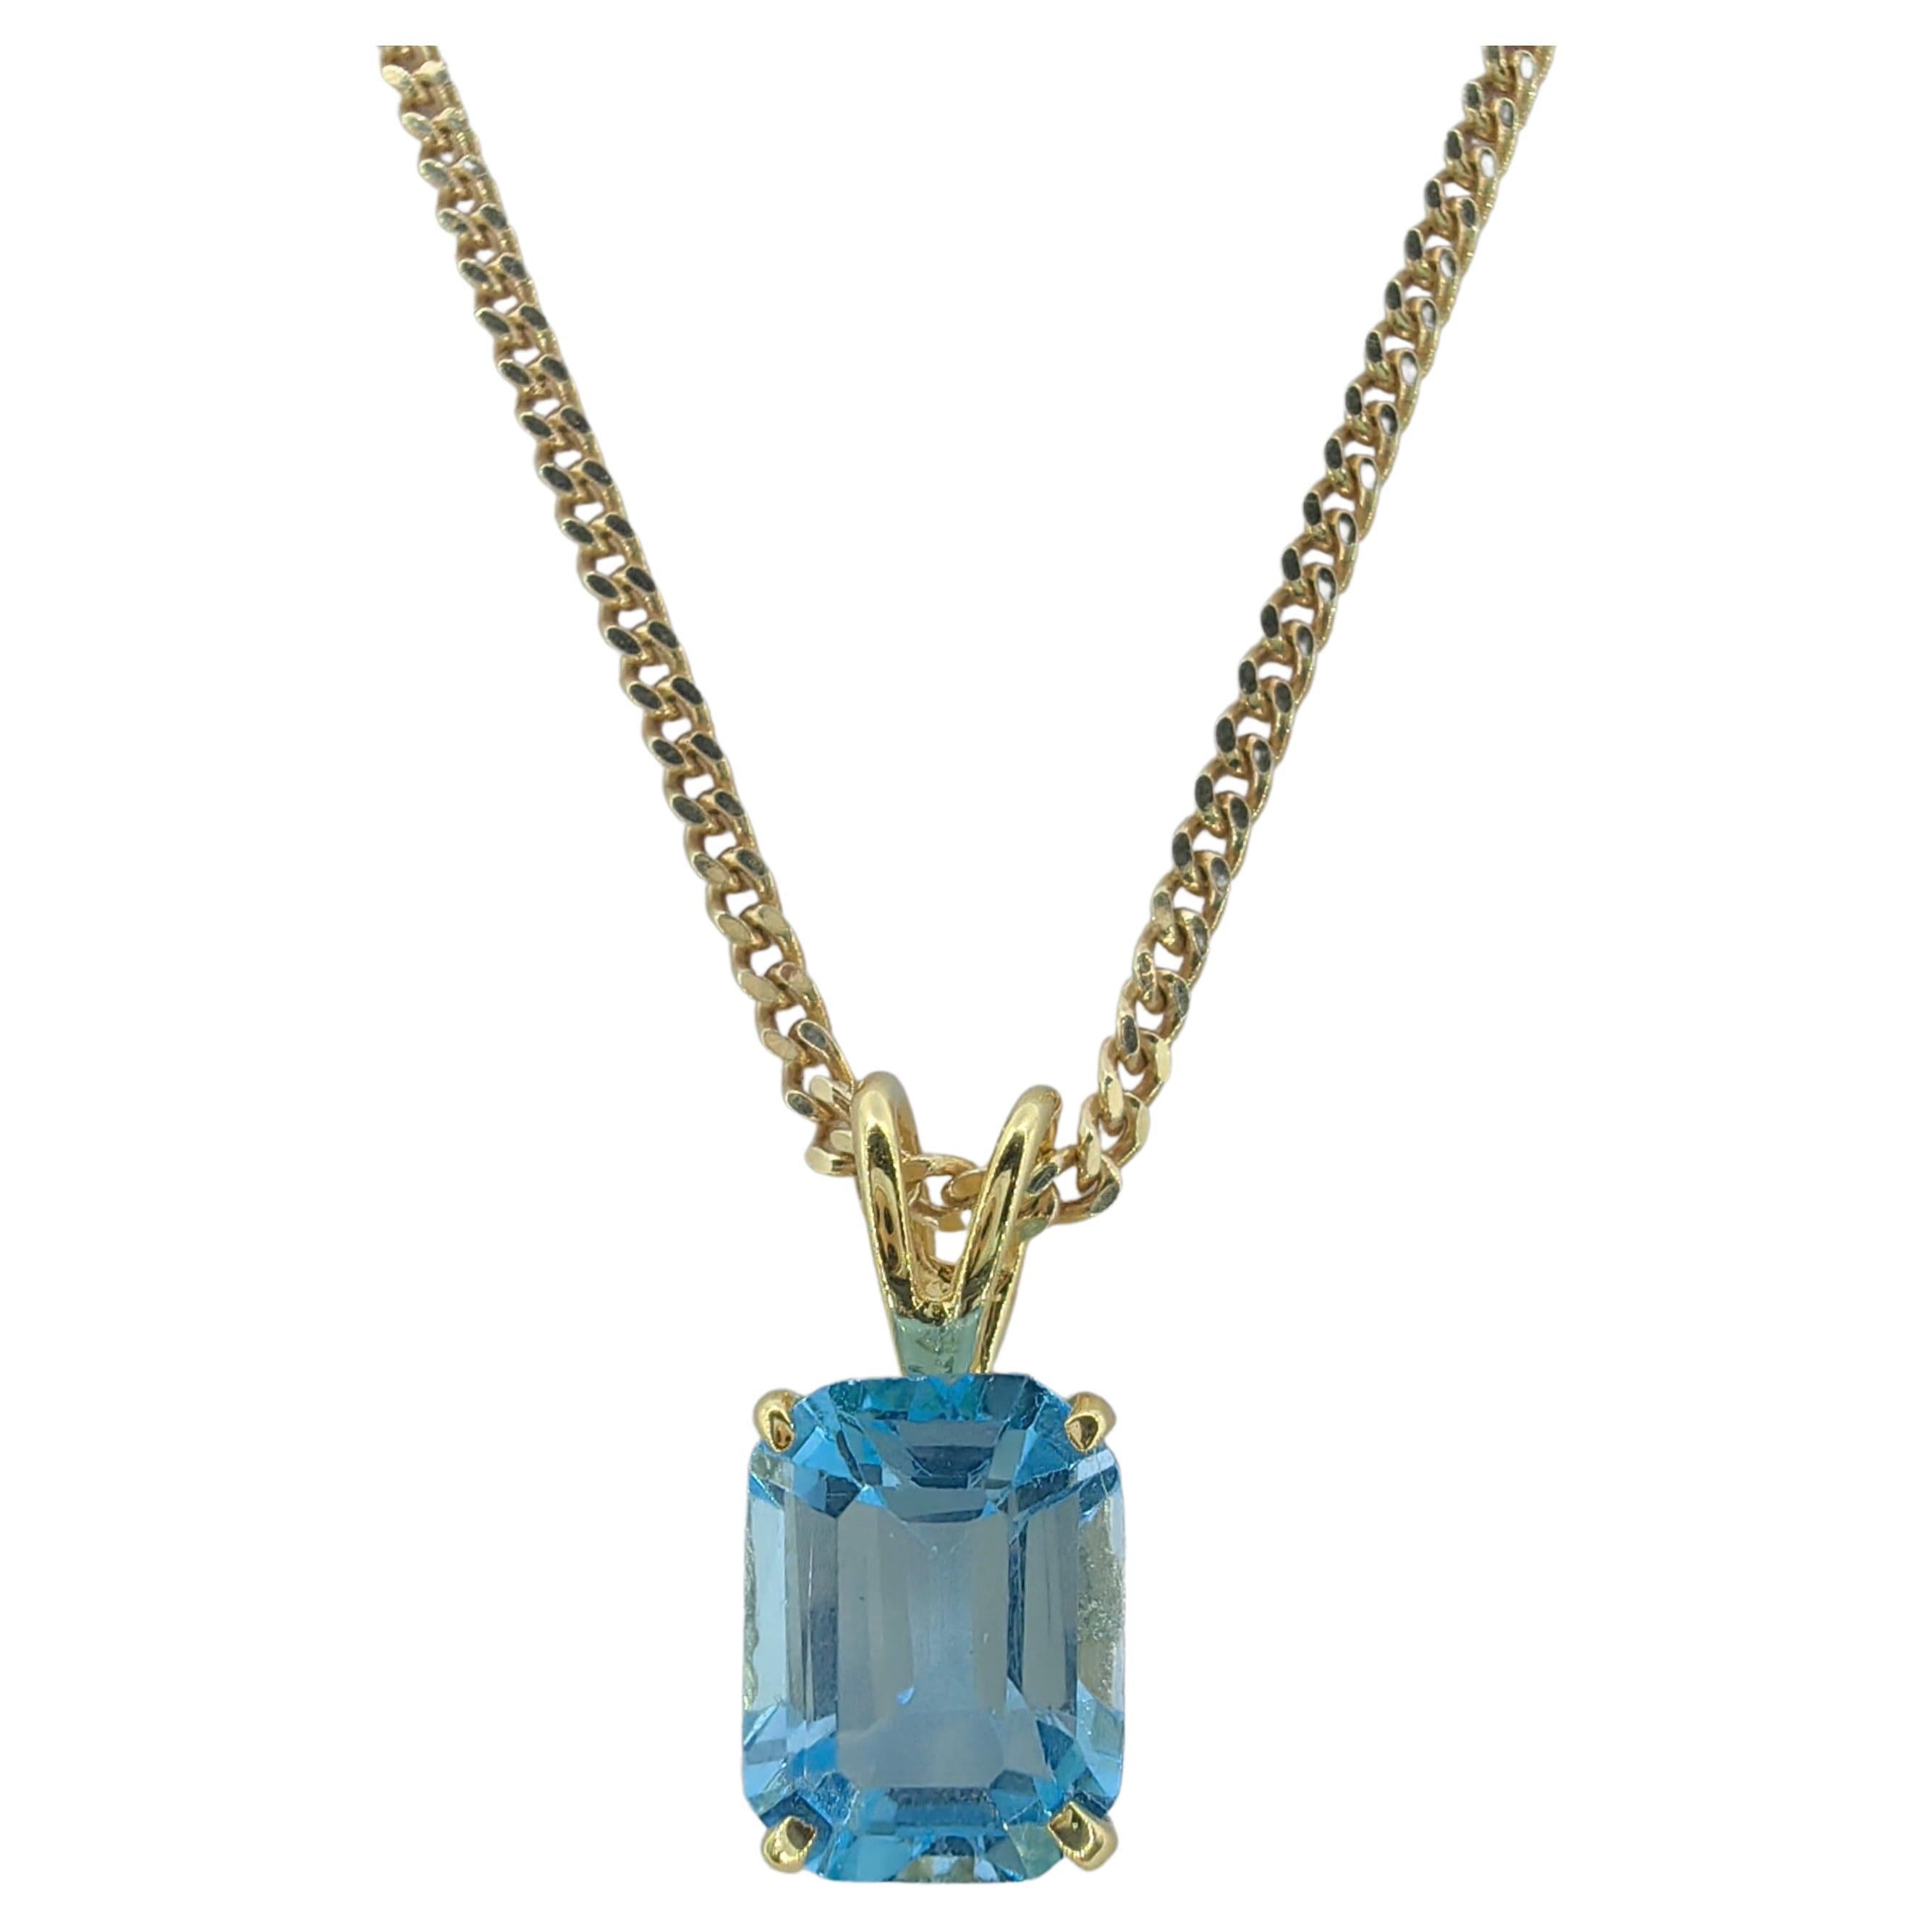 Vintage 1980's Emerald Cut Blue Topaz Necklace Pendant in 14K Yellow Gold #1 For Sale